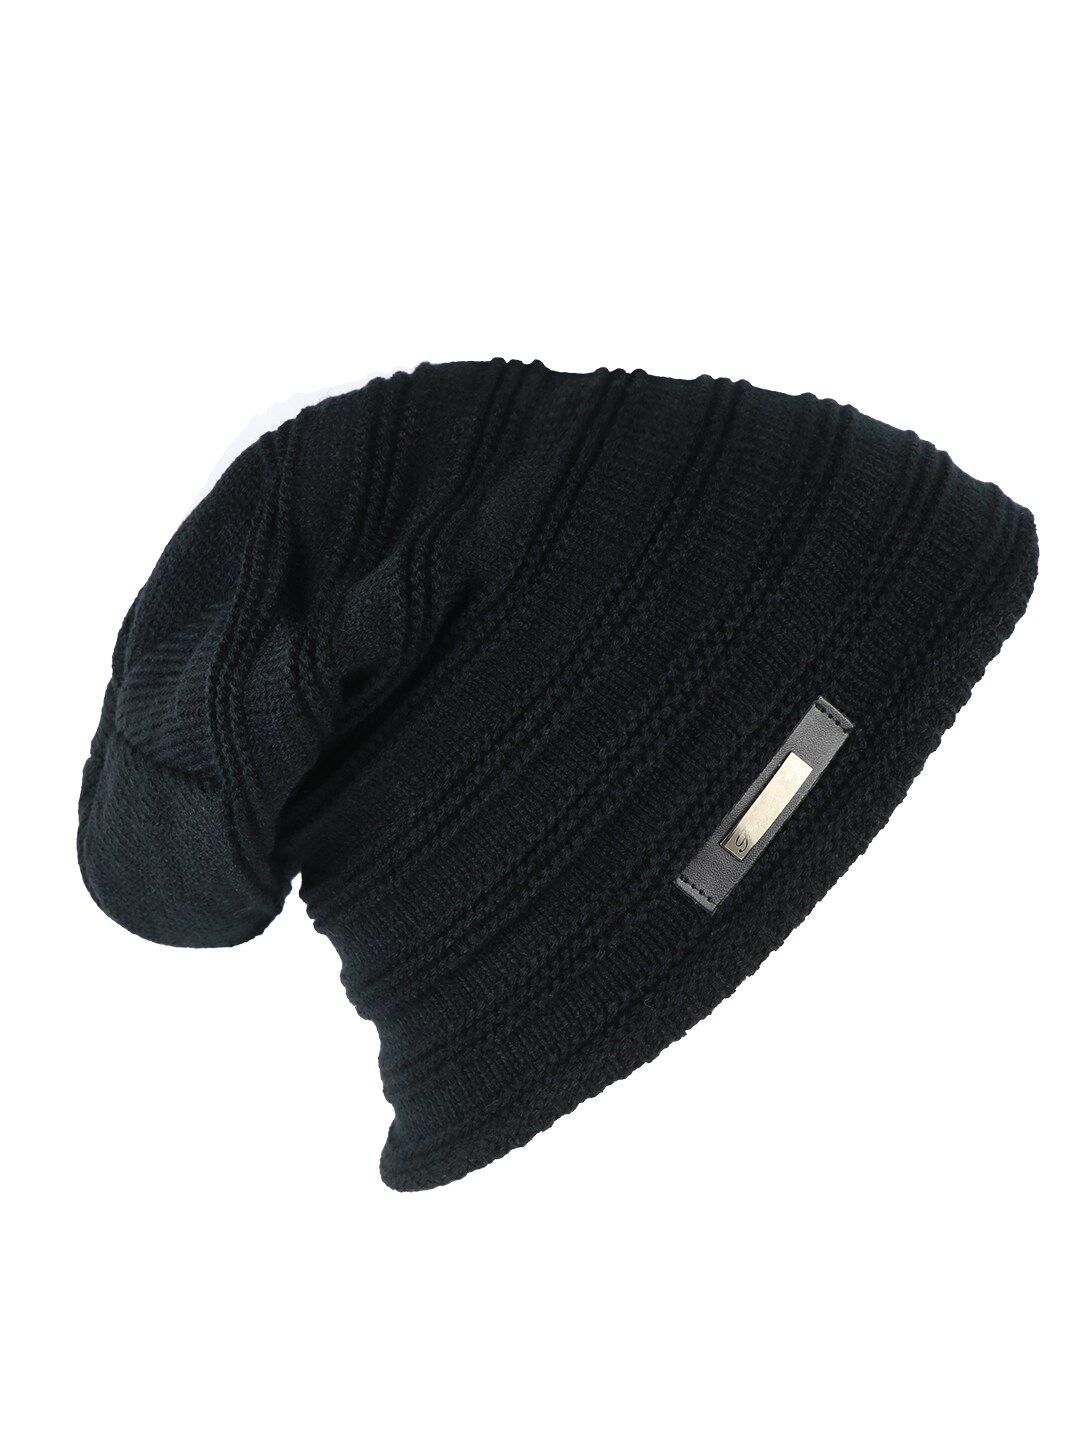 iSWEVEN Black Winter Beanie Price in India